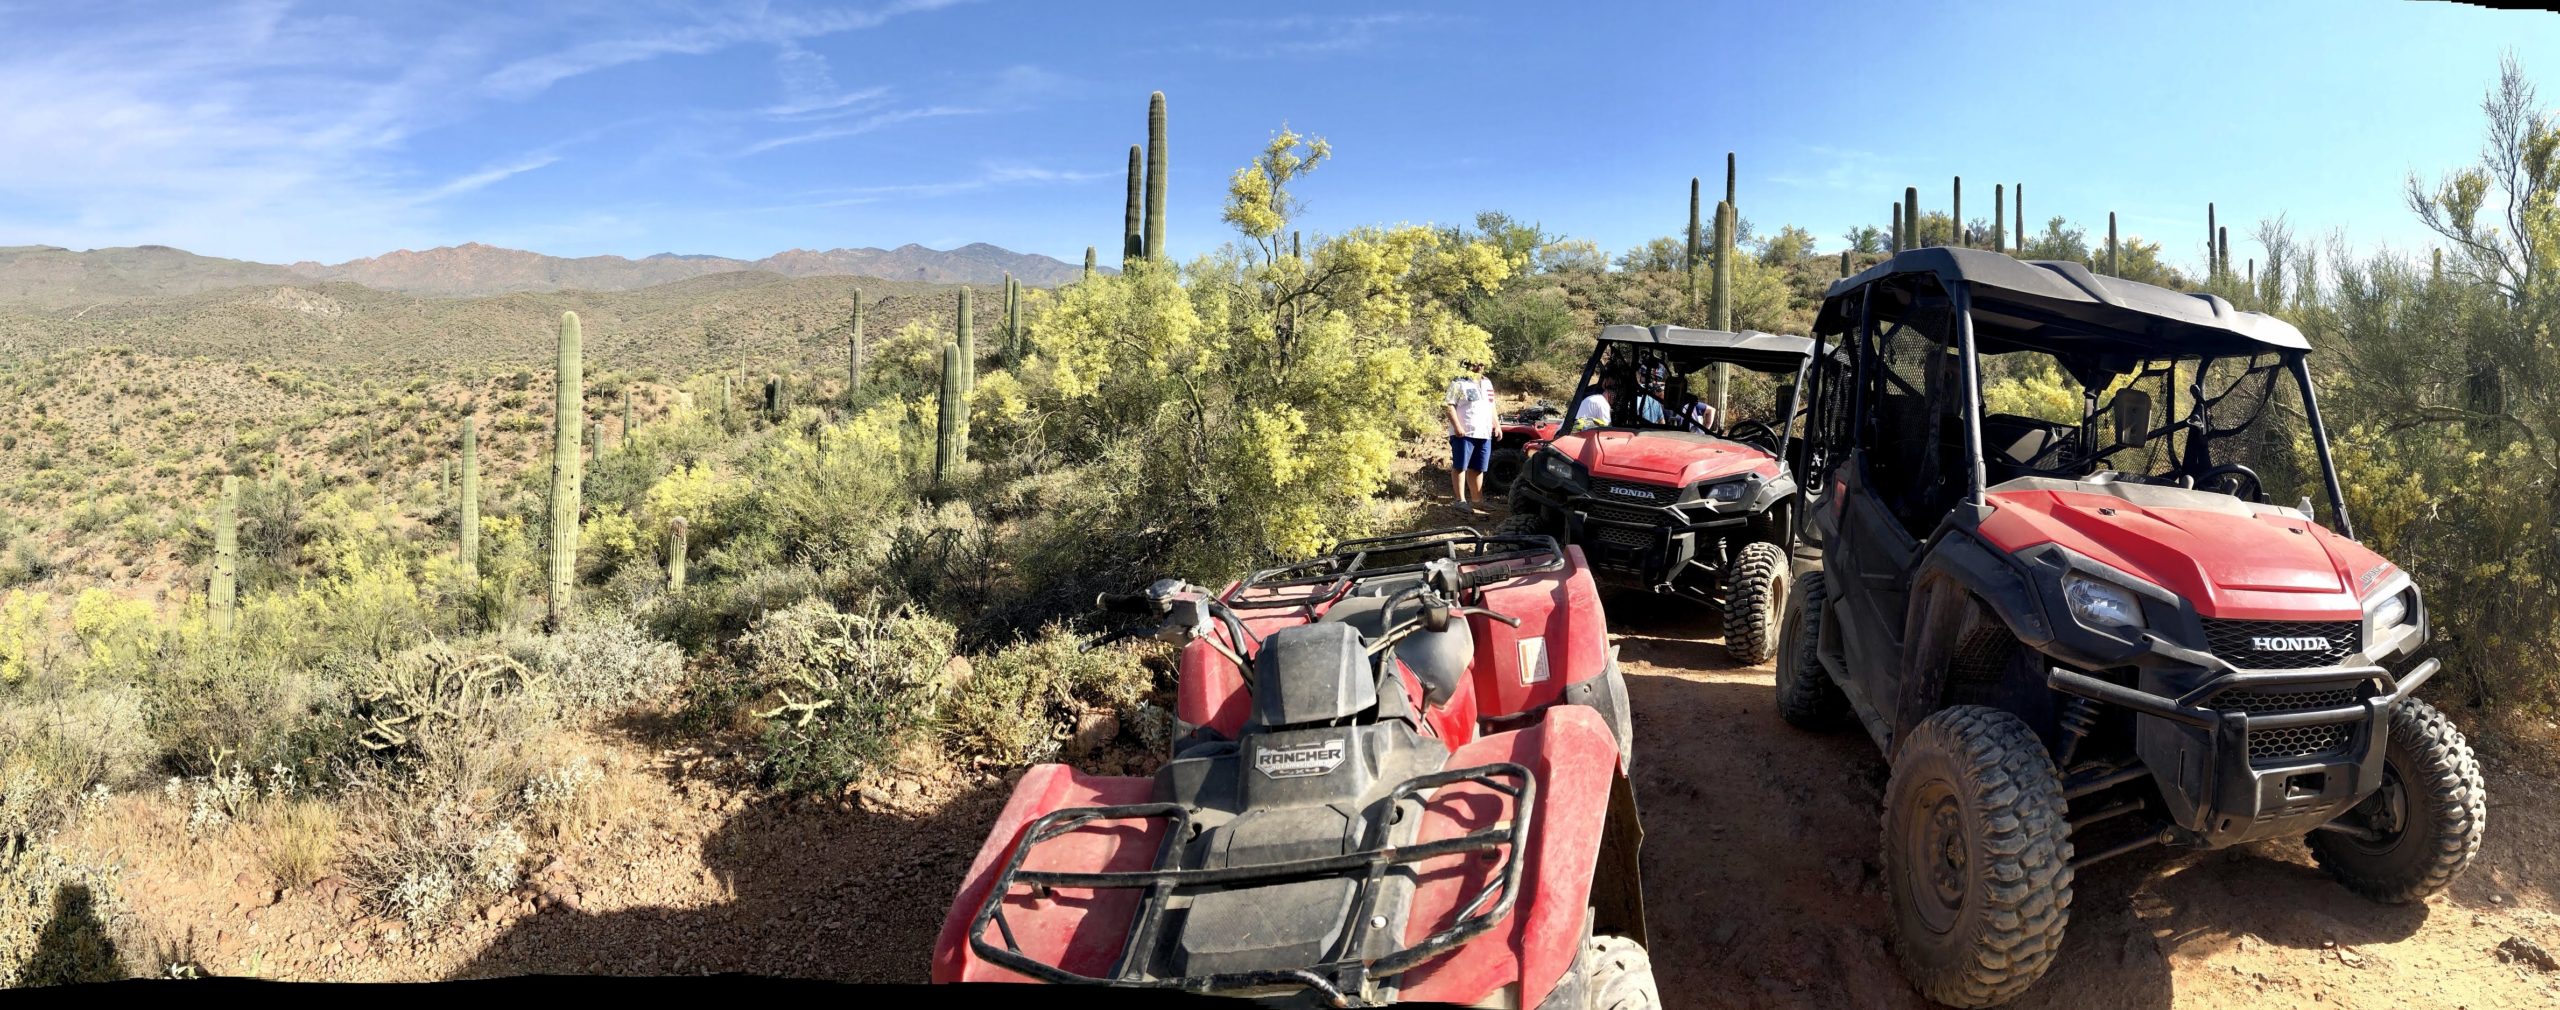 5 Reasons To Go Off-Road with Arizona Outdoor Fun Adventures & Tours